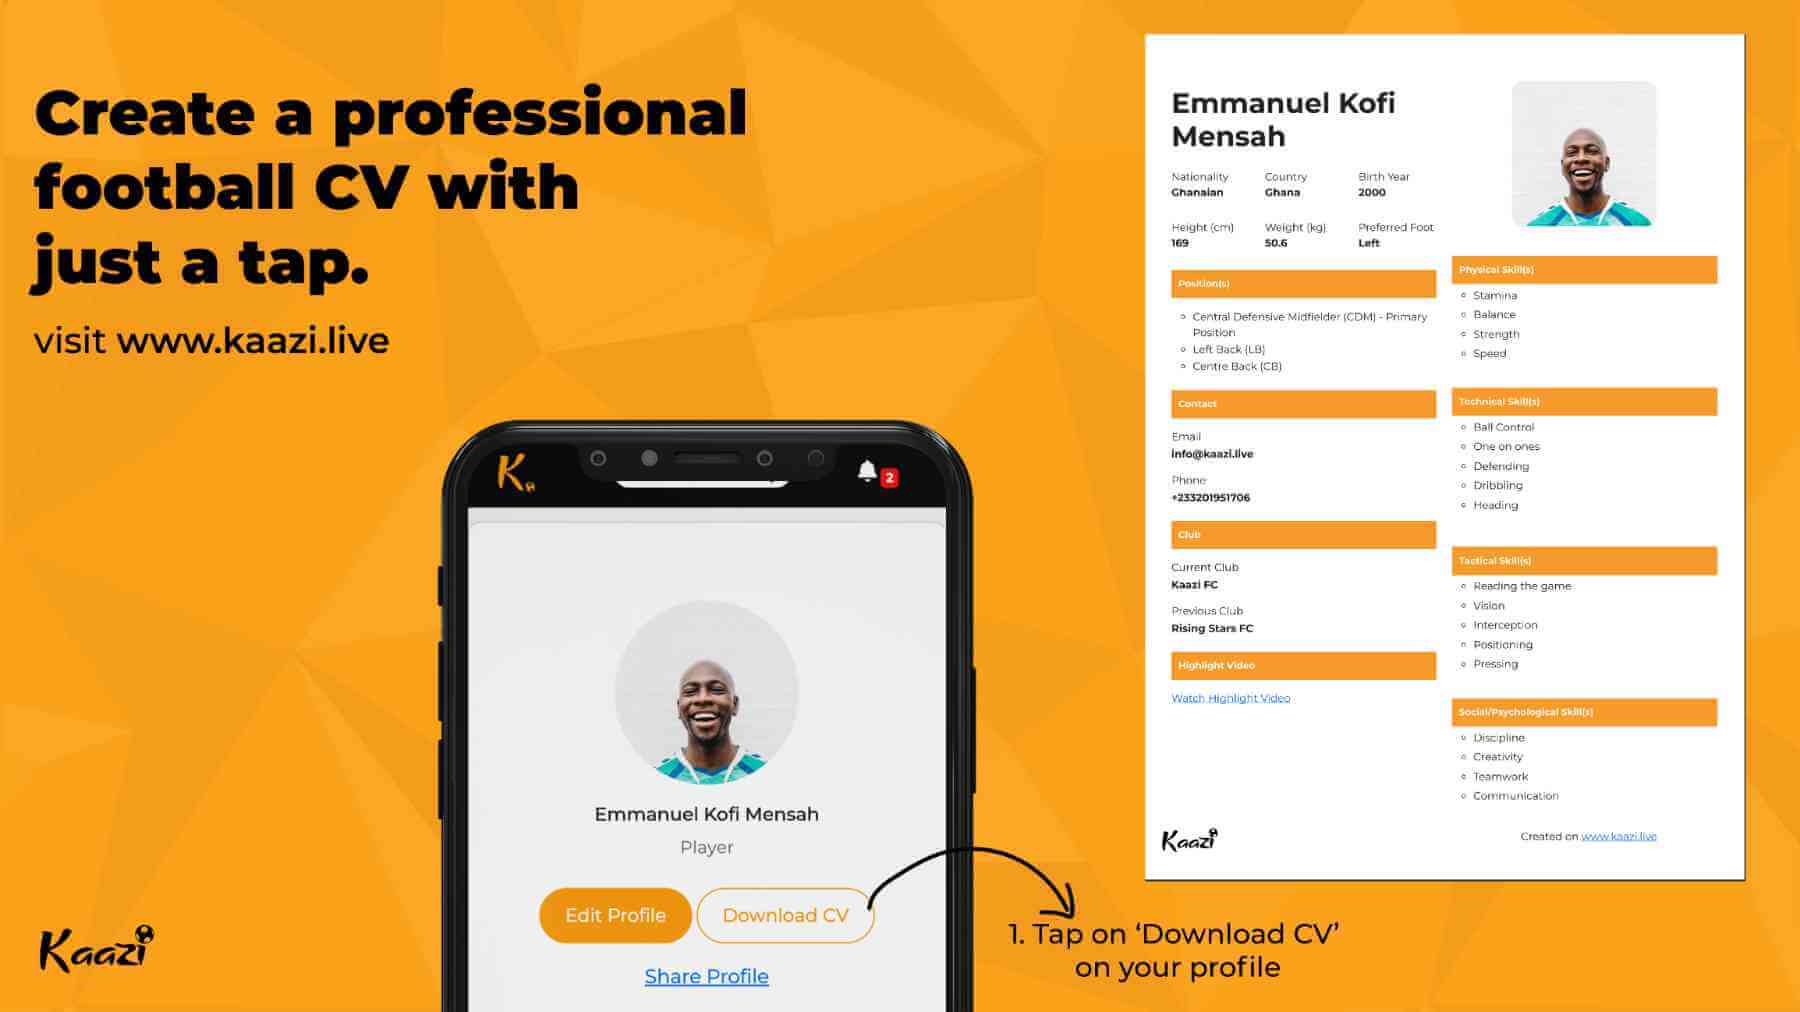 Sport app startup Kaazis new feature helps footballers make professional CV in one tap